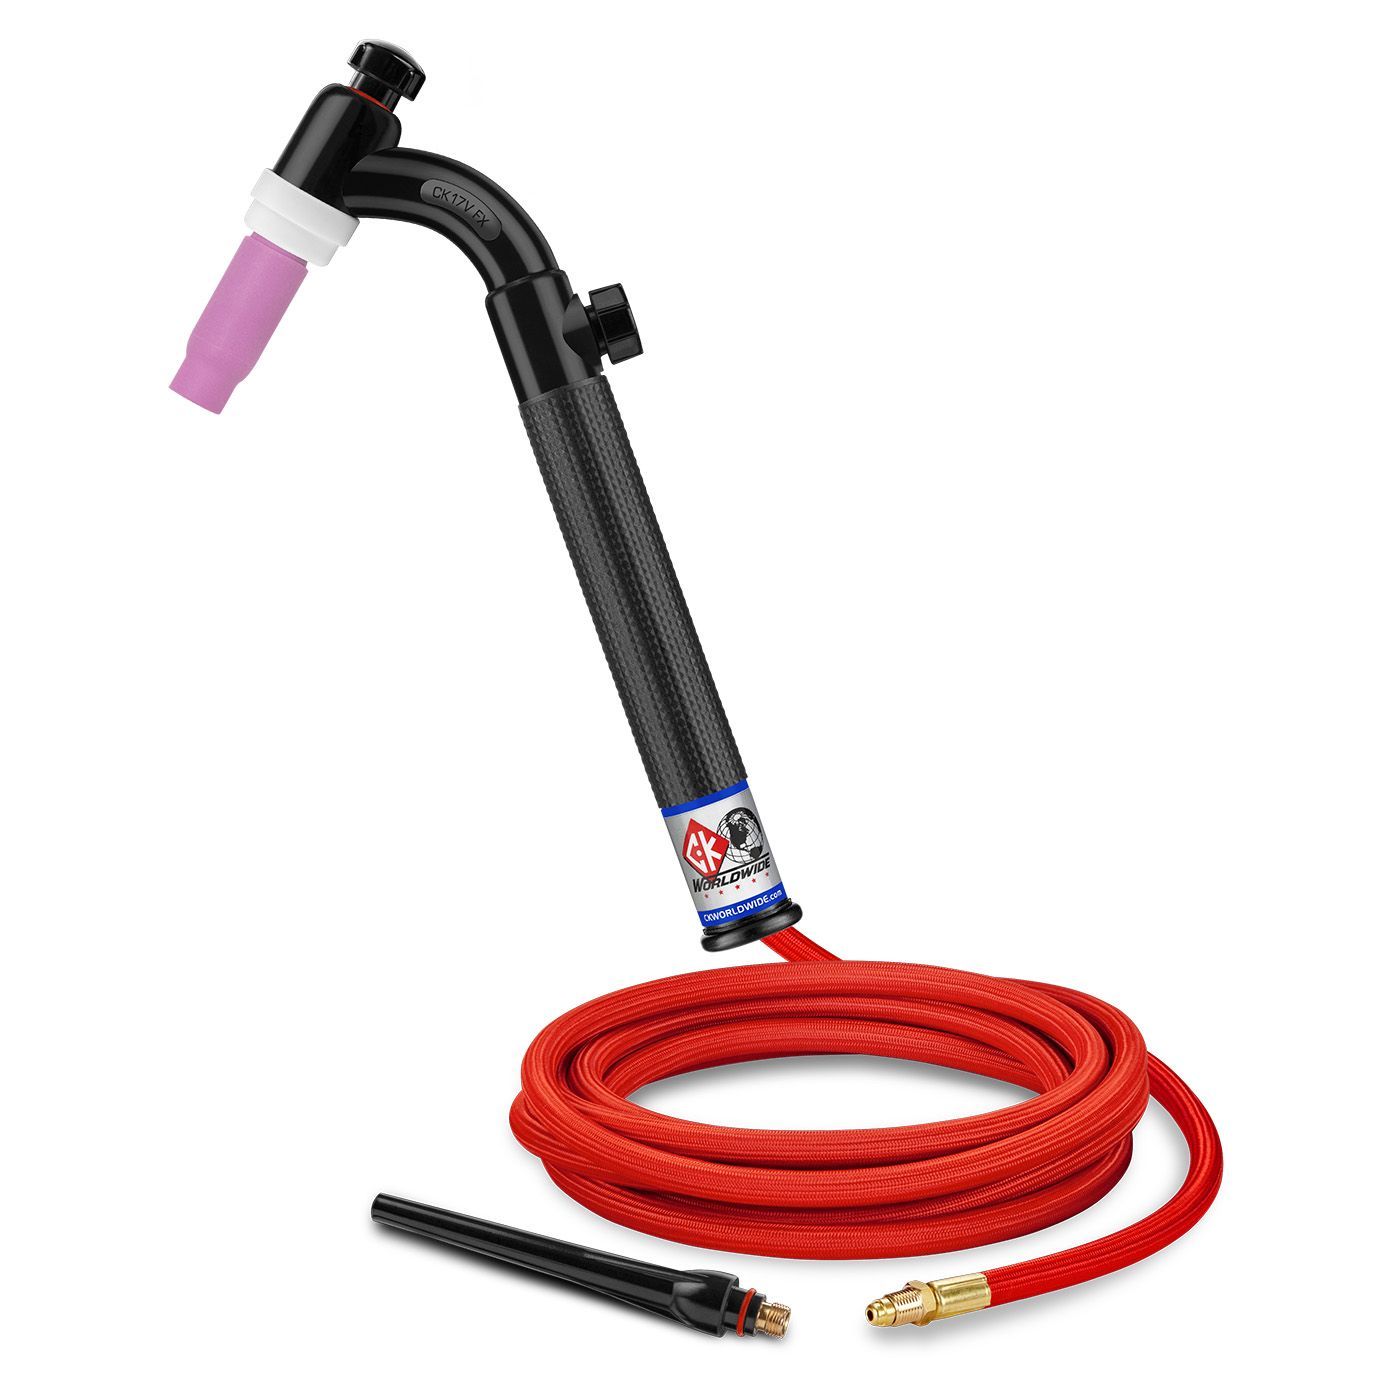 * CK Worldwide | TIG Torch - #17 Style W/ Gas control valve - (CK17V-12-RSF FX)W/ 12.5ft Super Flex cable